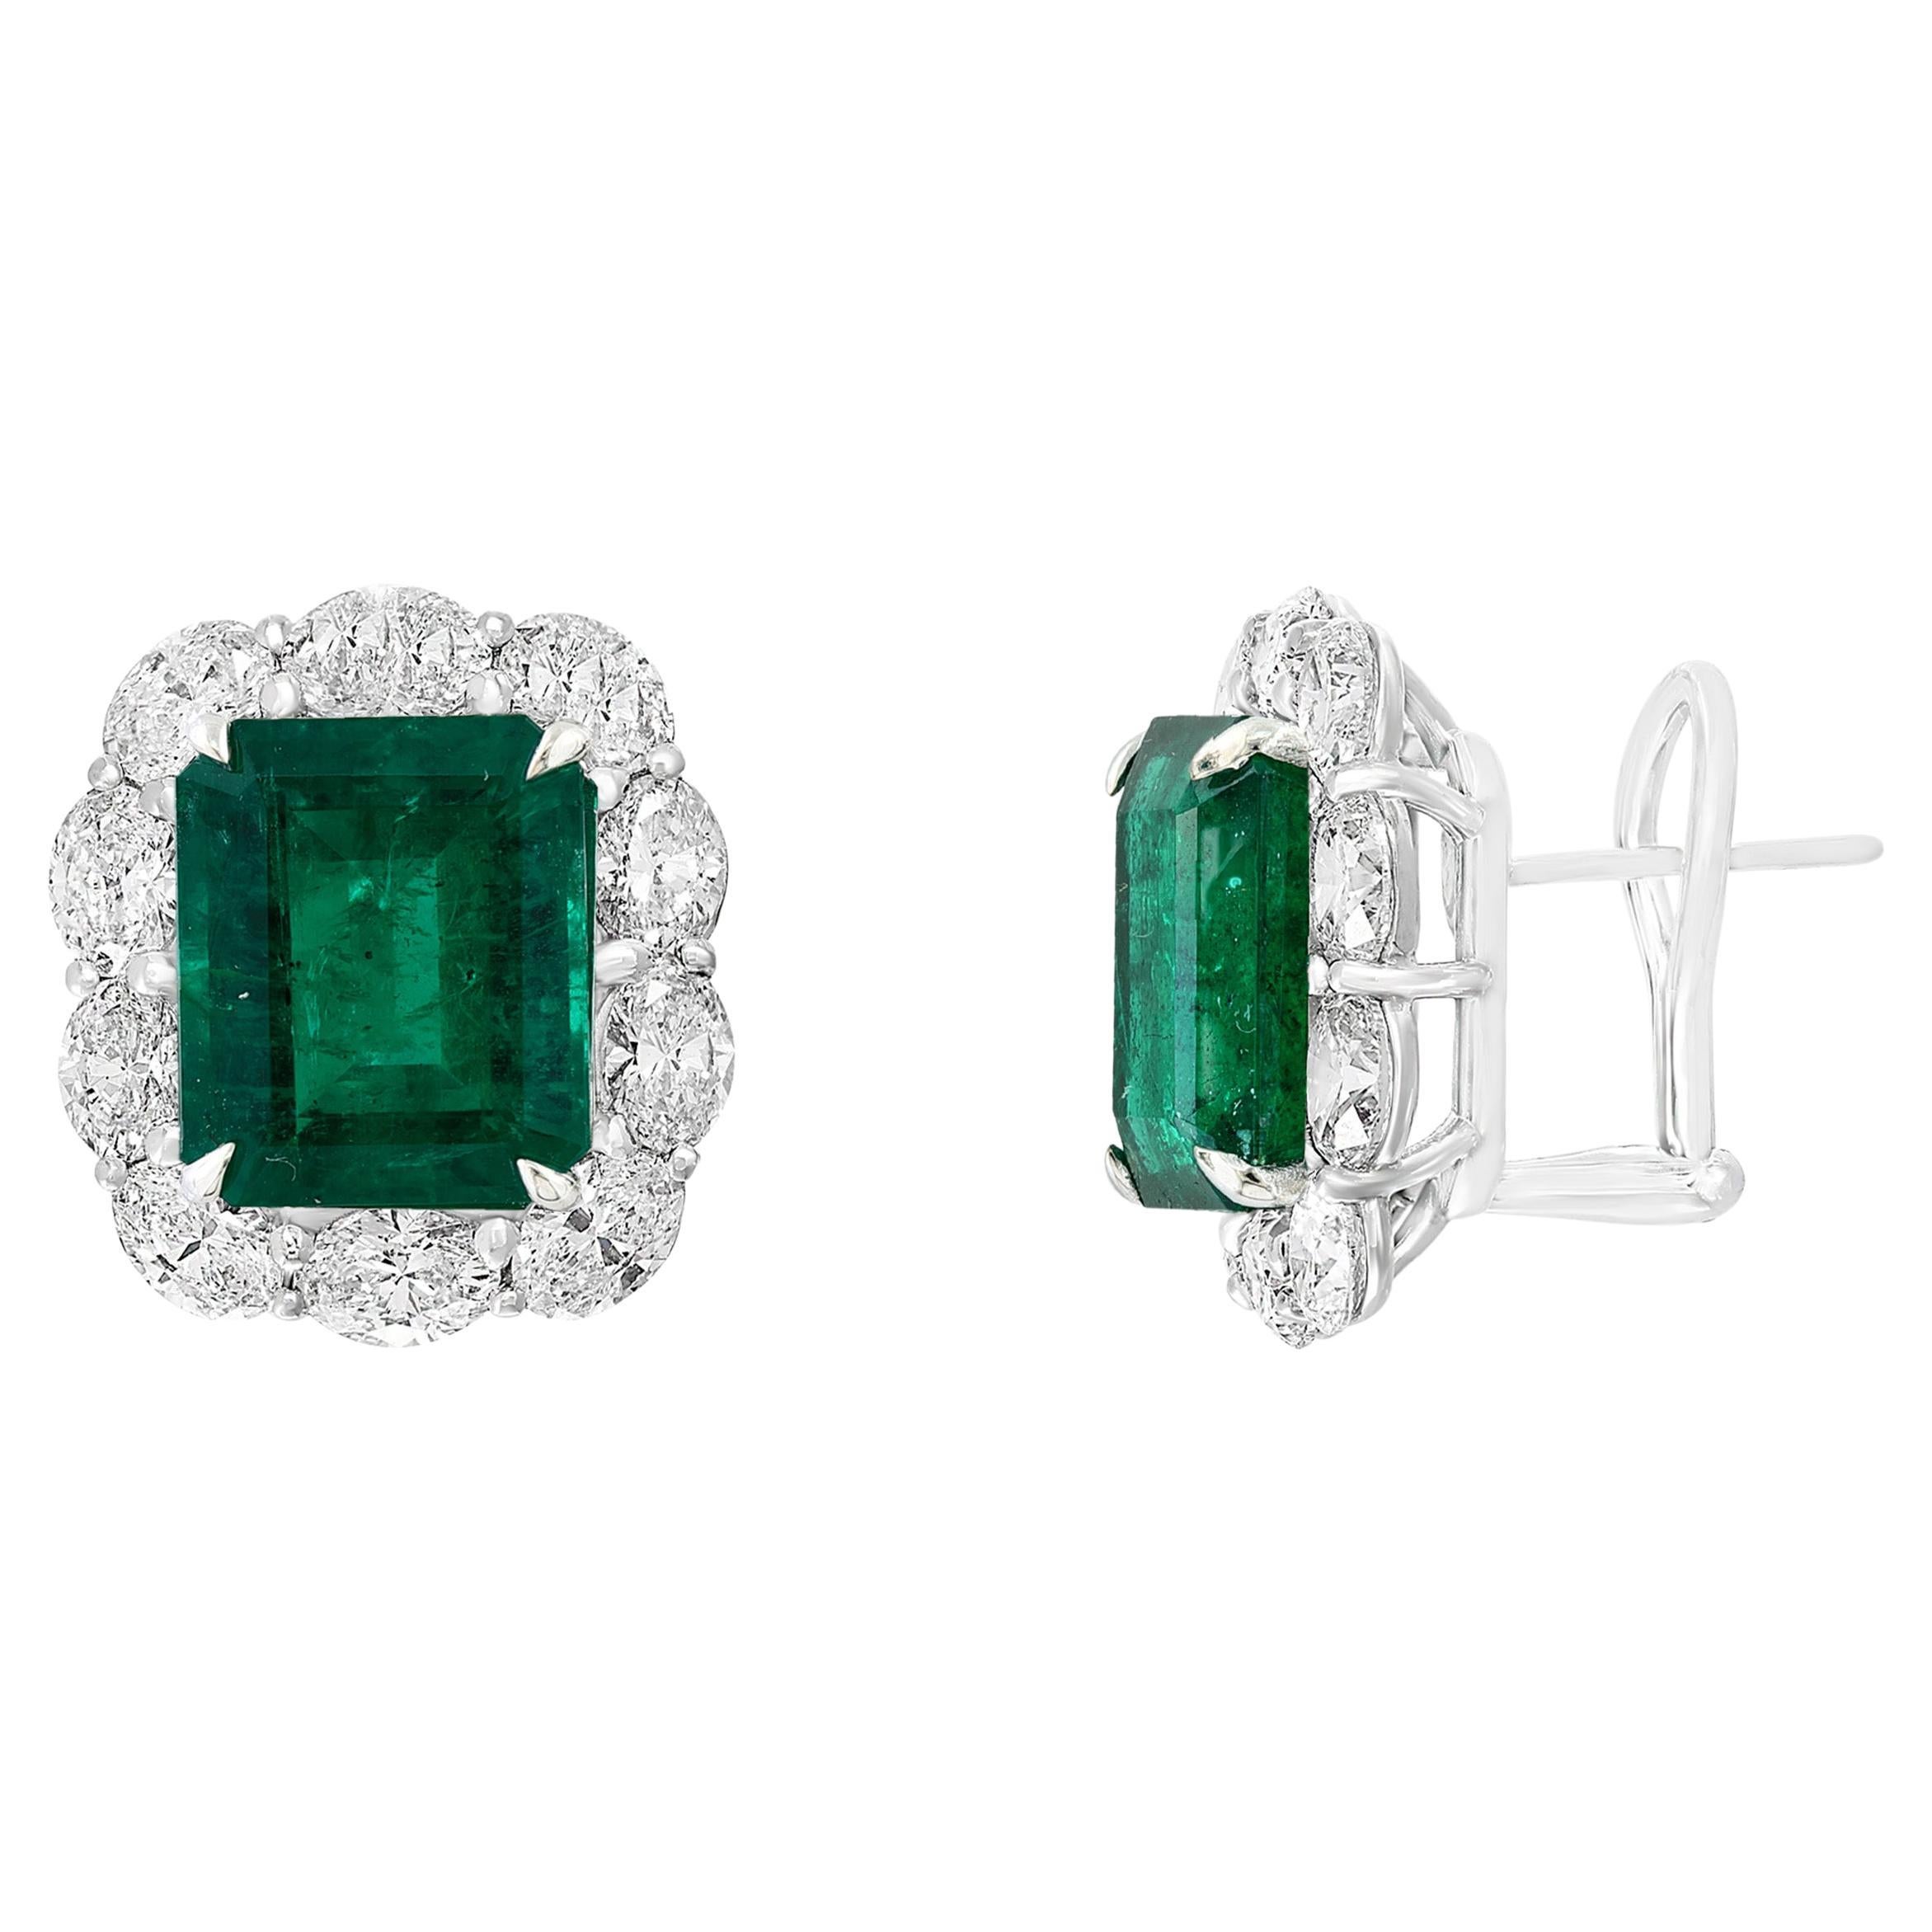 6.15 Carat Emerald Cut Emerald and Diamond Halo Earring in 18K White Gold For Sale